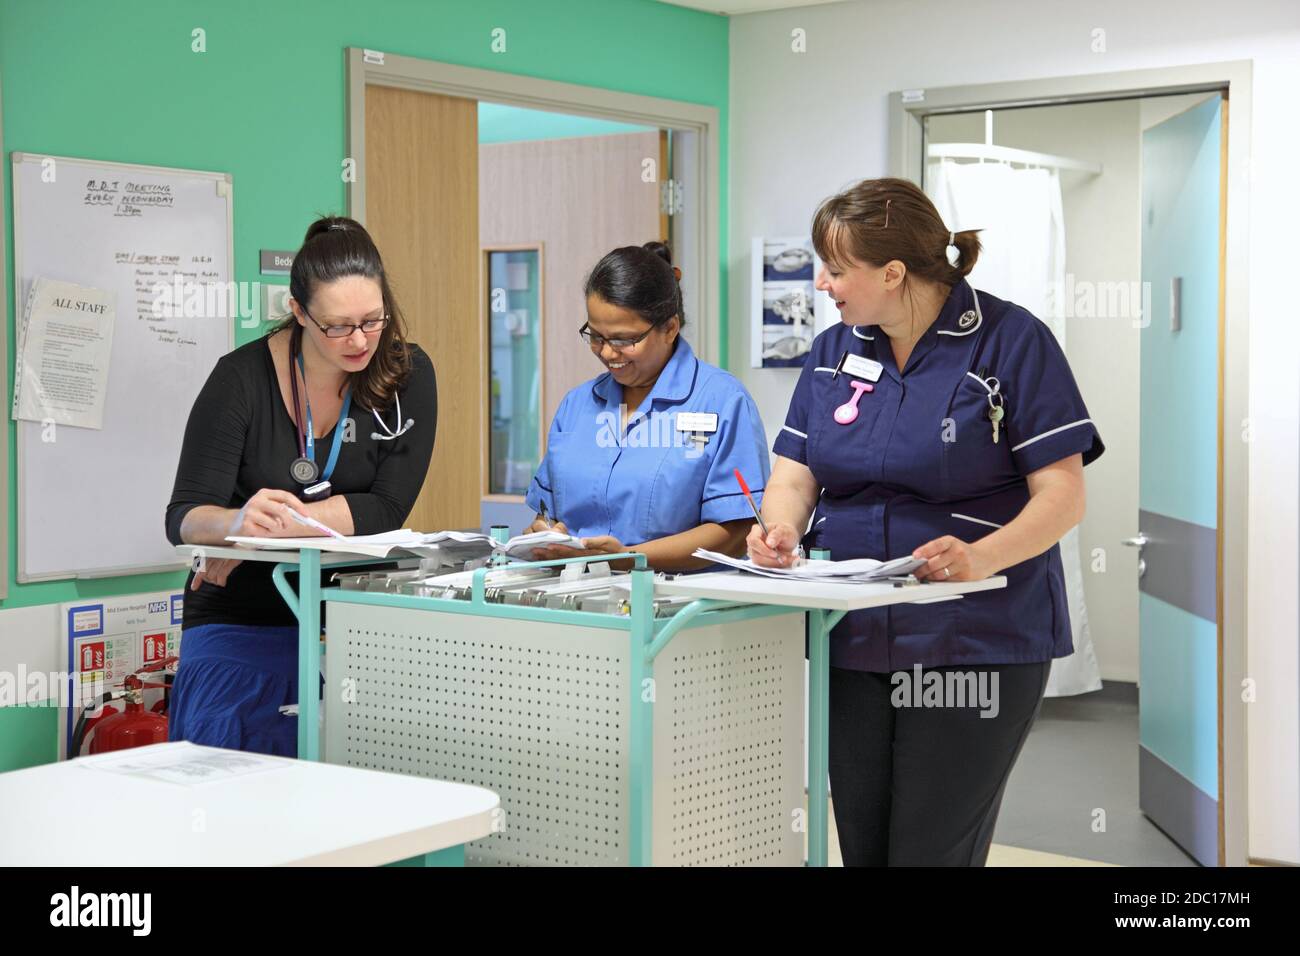 Modern UK hospital ward - nurses station. Two nurses discuss patient documents with a female doctor. Stock Photo